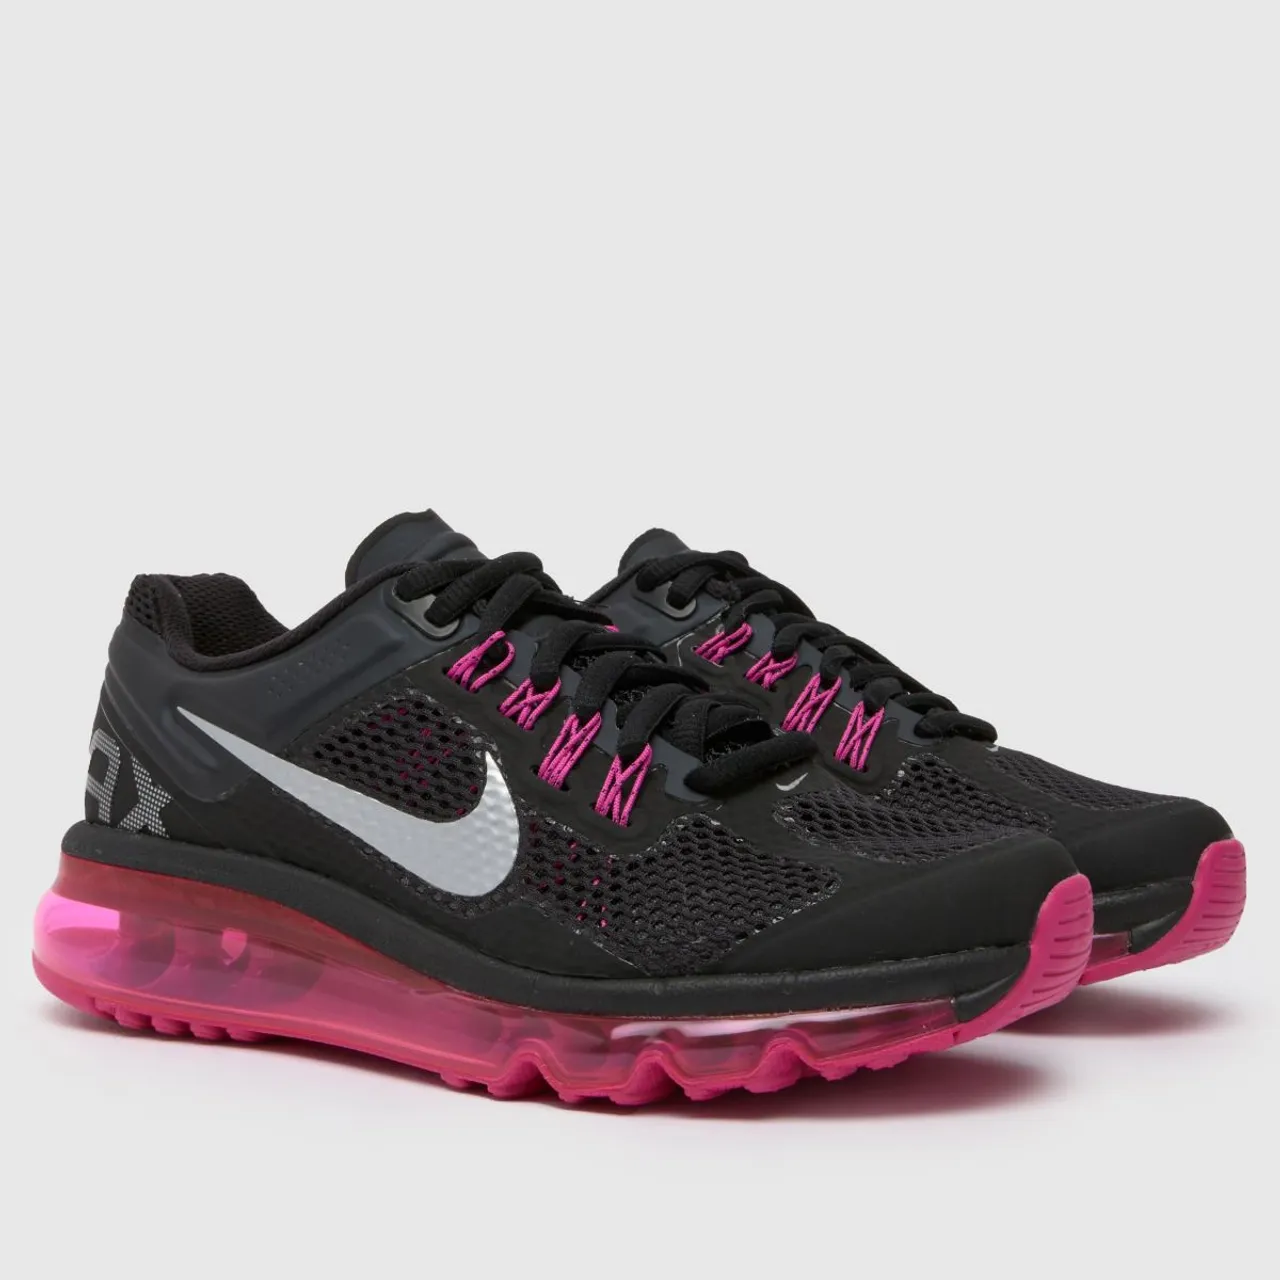 Nike Black Multi air max 2013 Girls Youth Trainers